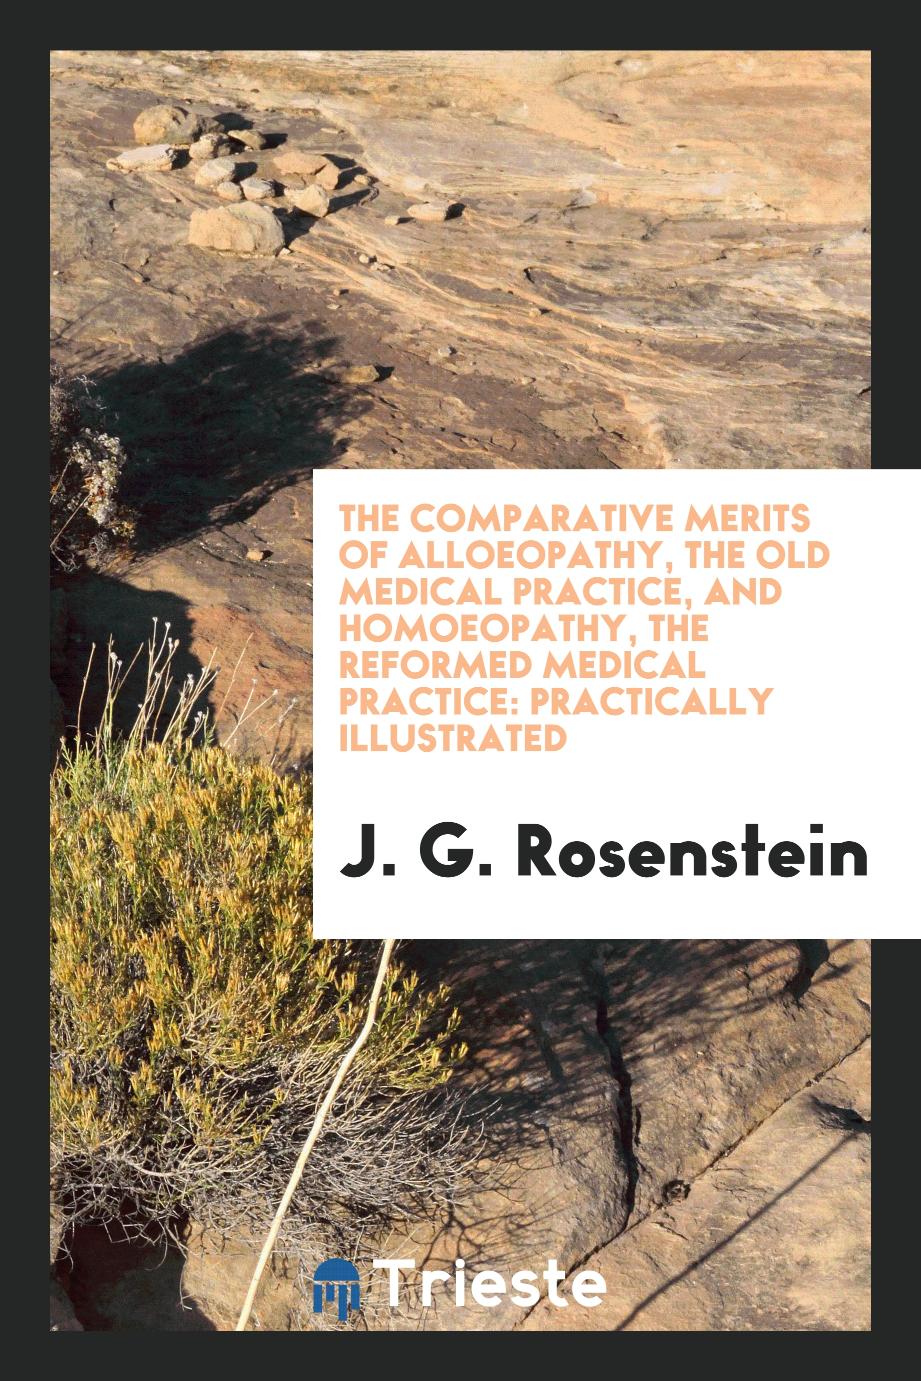 The Comparative Merits of Alloeopathy, the Old Medical Practice, and Homoeopathy, the Reformed Medical Practice: Practically Illustrated